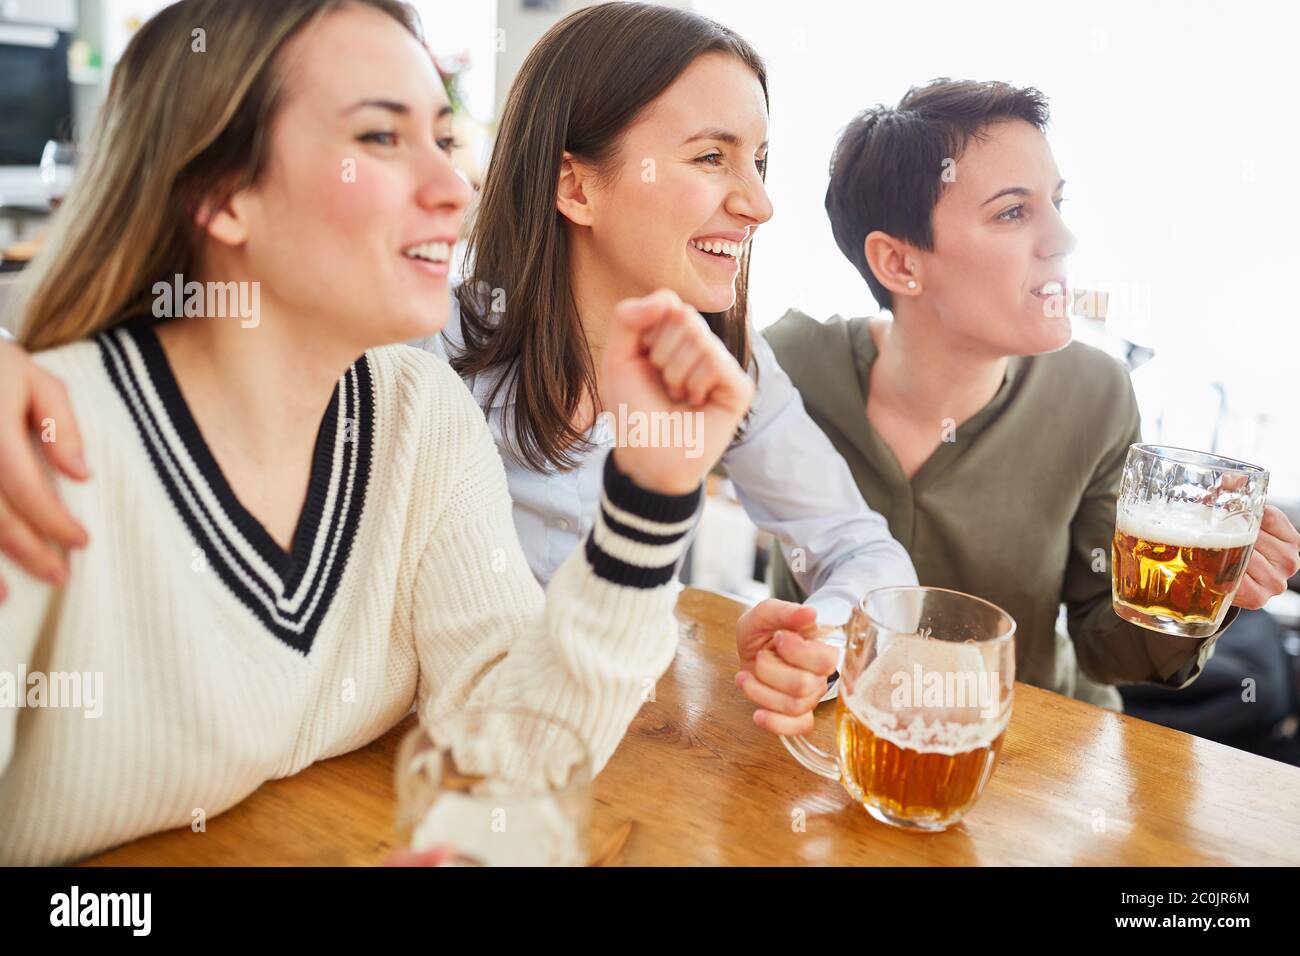 Group of women watch football, drink beer and cheer on their team Stock Photo